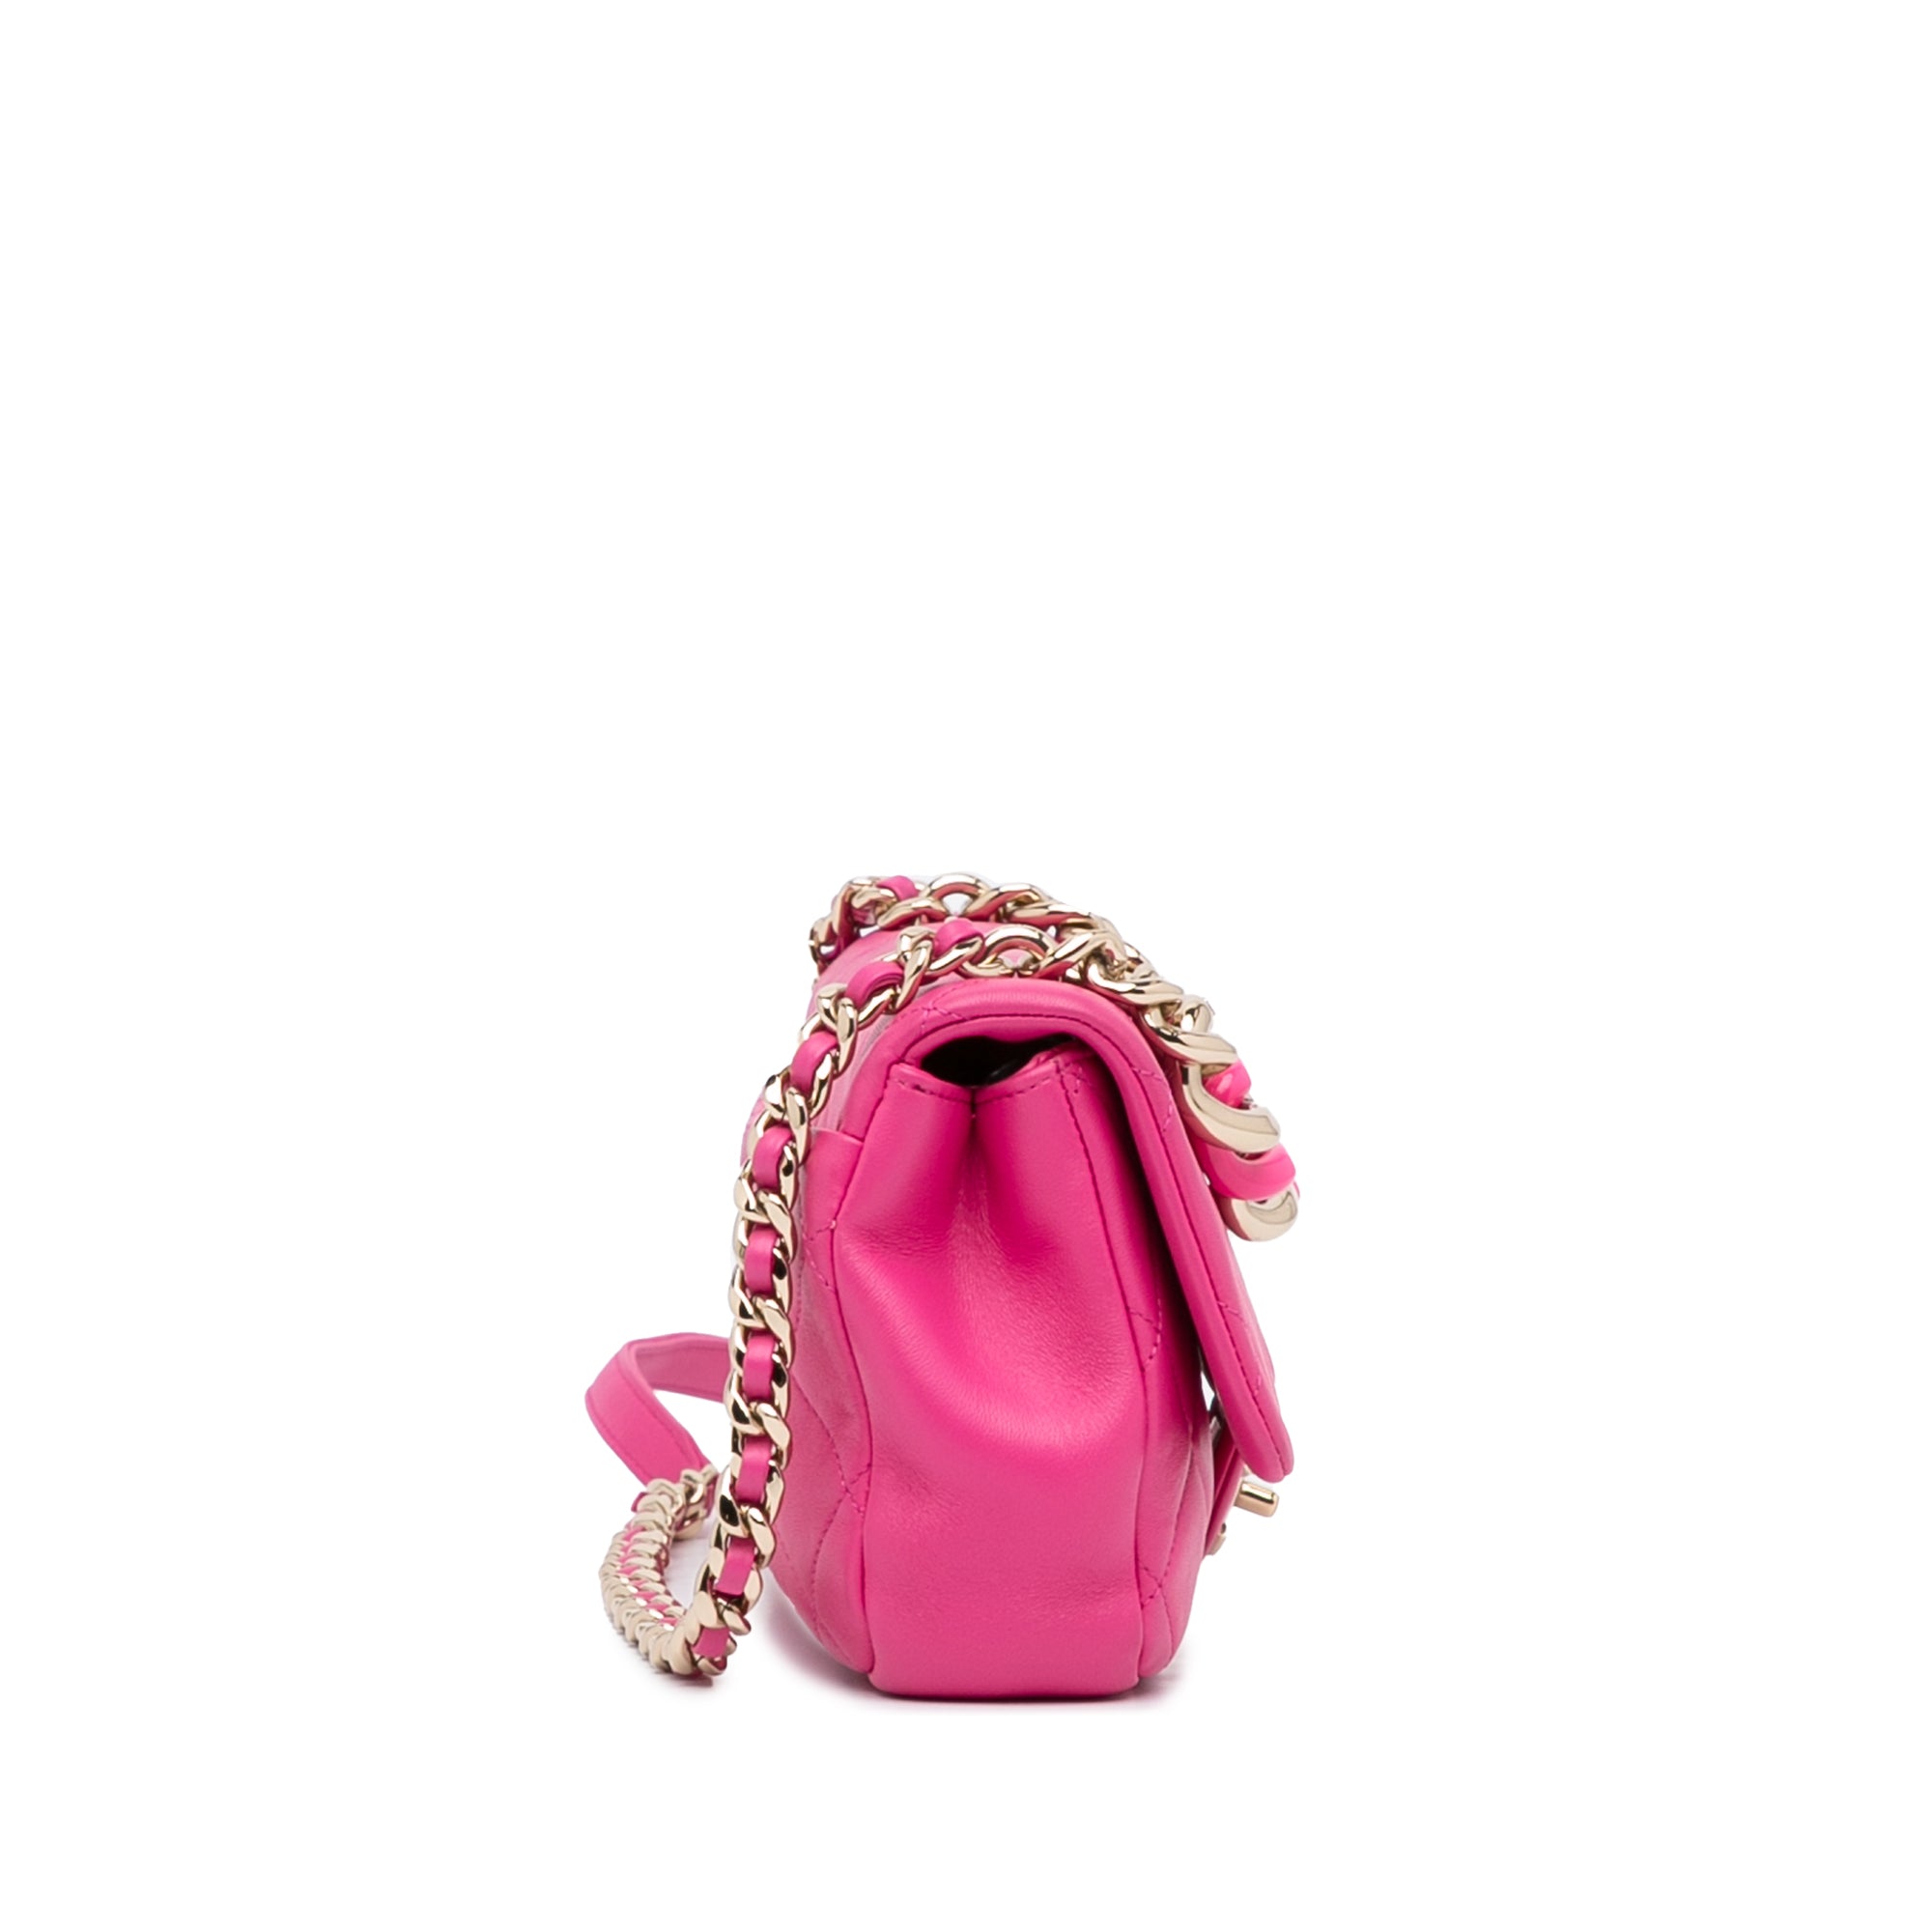 Chanel SATIN Classic 2.55 Reissue 226 Quilted PINK Chain Flap Bag clutch  purse